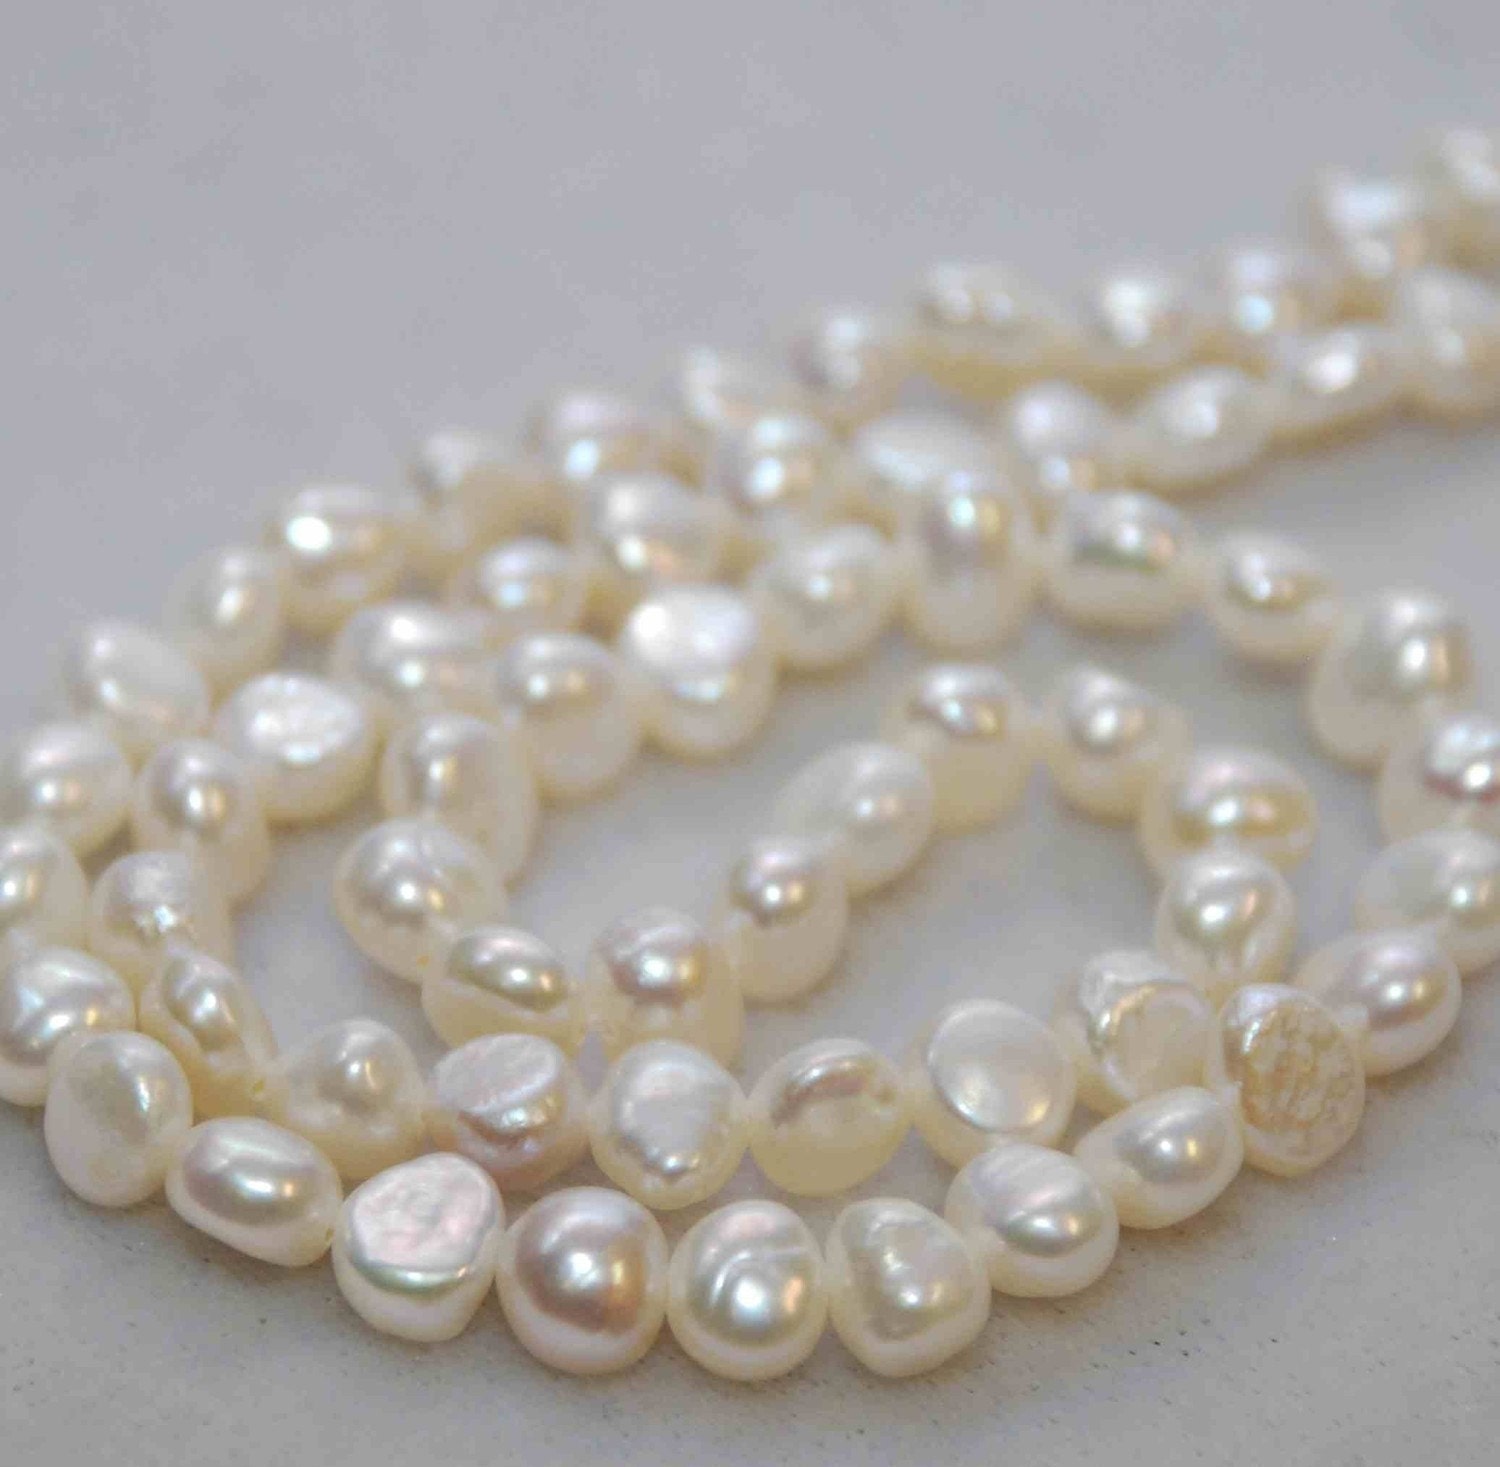 30g Mixed Faux Pearls, Cream Pearls, Rust Pearls, Mixed Shapes and Sizes  Acrylic Pearls For Jewellery Making and Crafts